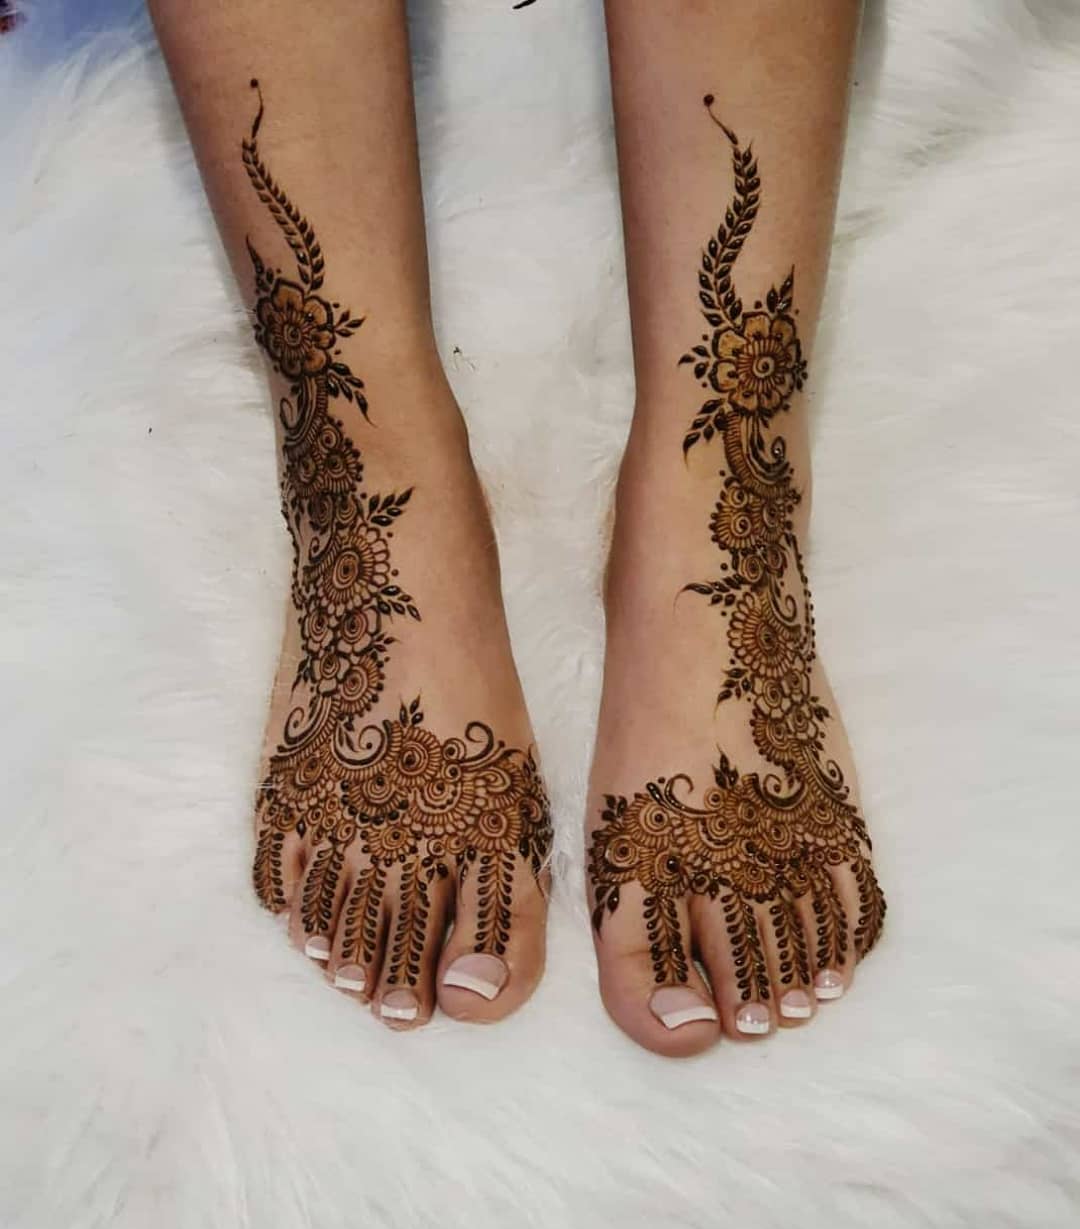 Brides-to-be, have you chosen bridal mehandi designs for your legs yet? |  VOGUE India | Vogue India